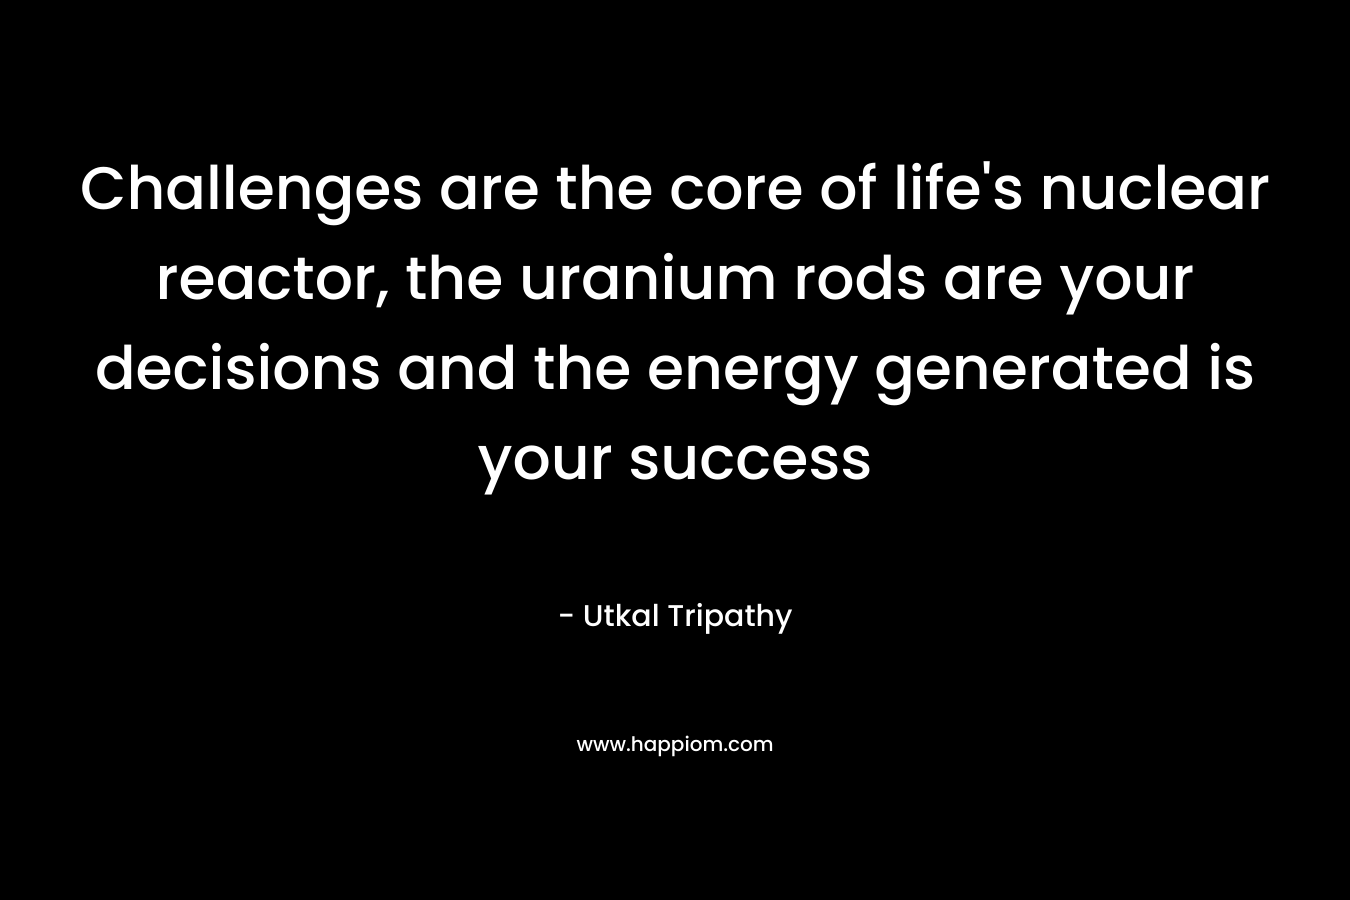 Challenges are the core of life’s nuclear reactor, the uranium rods are your decisions and the energy generated is your success – Utkal Tripathy